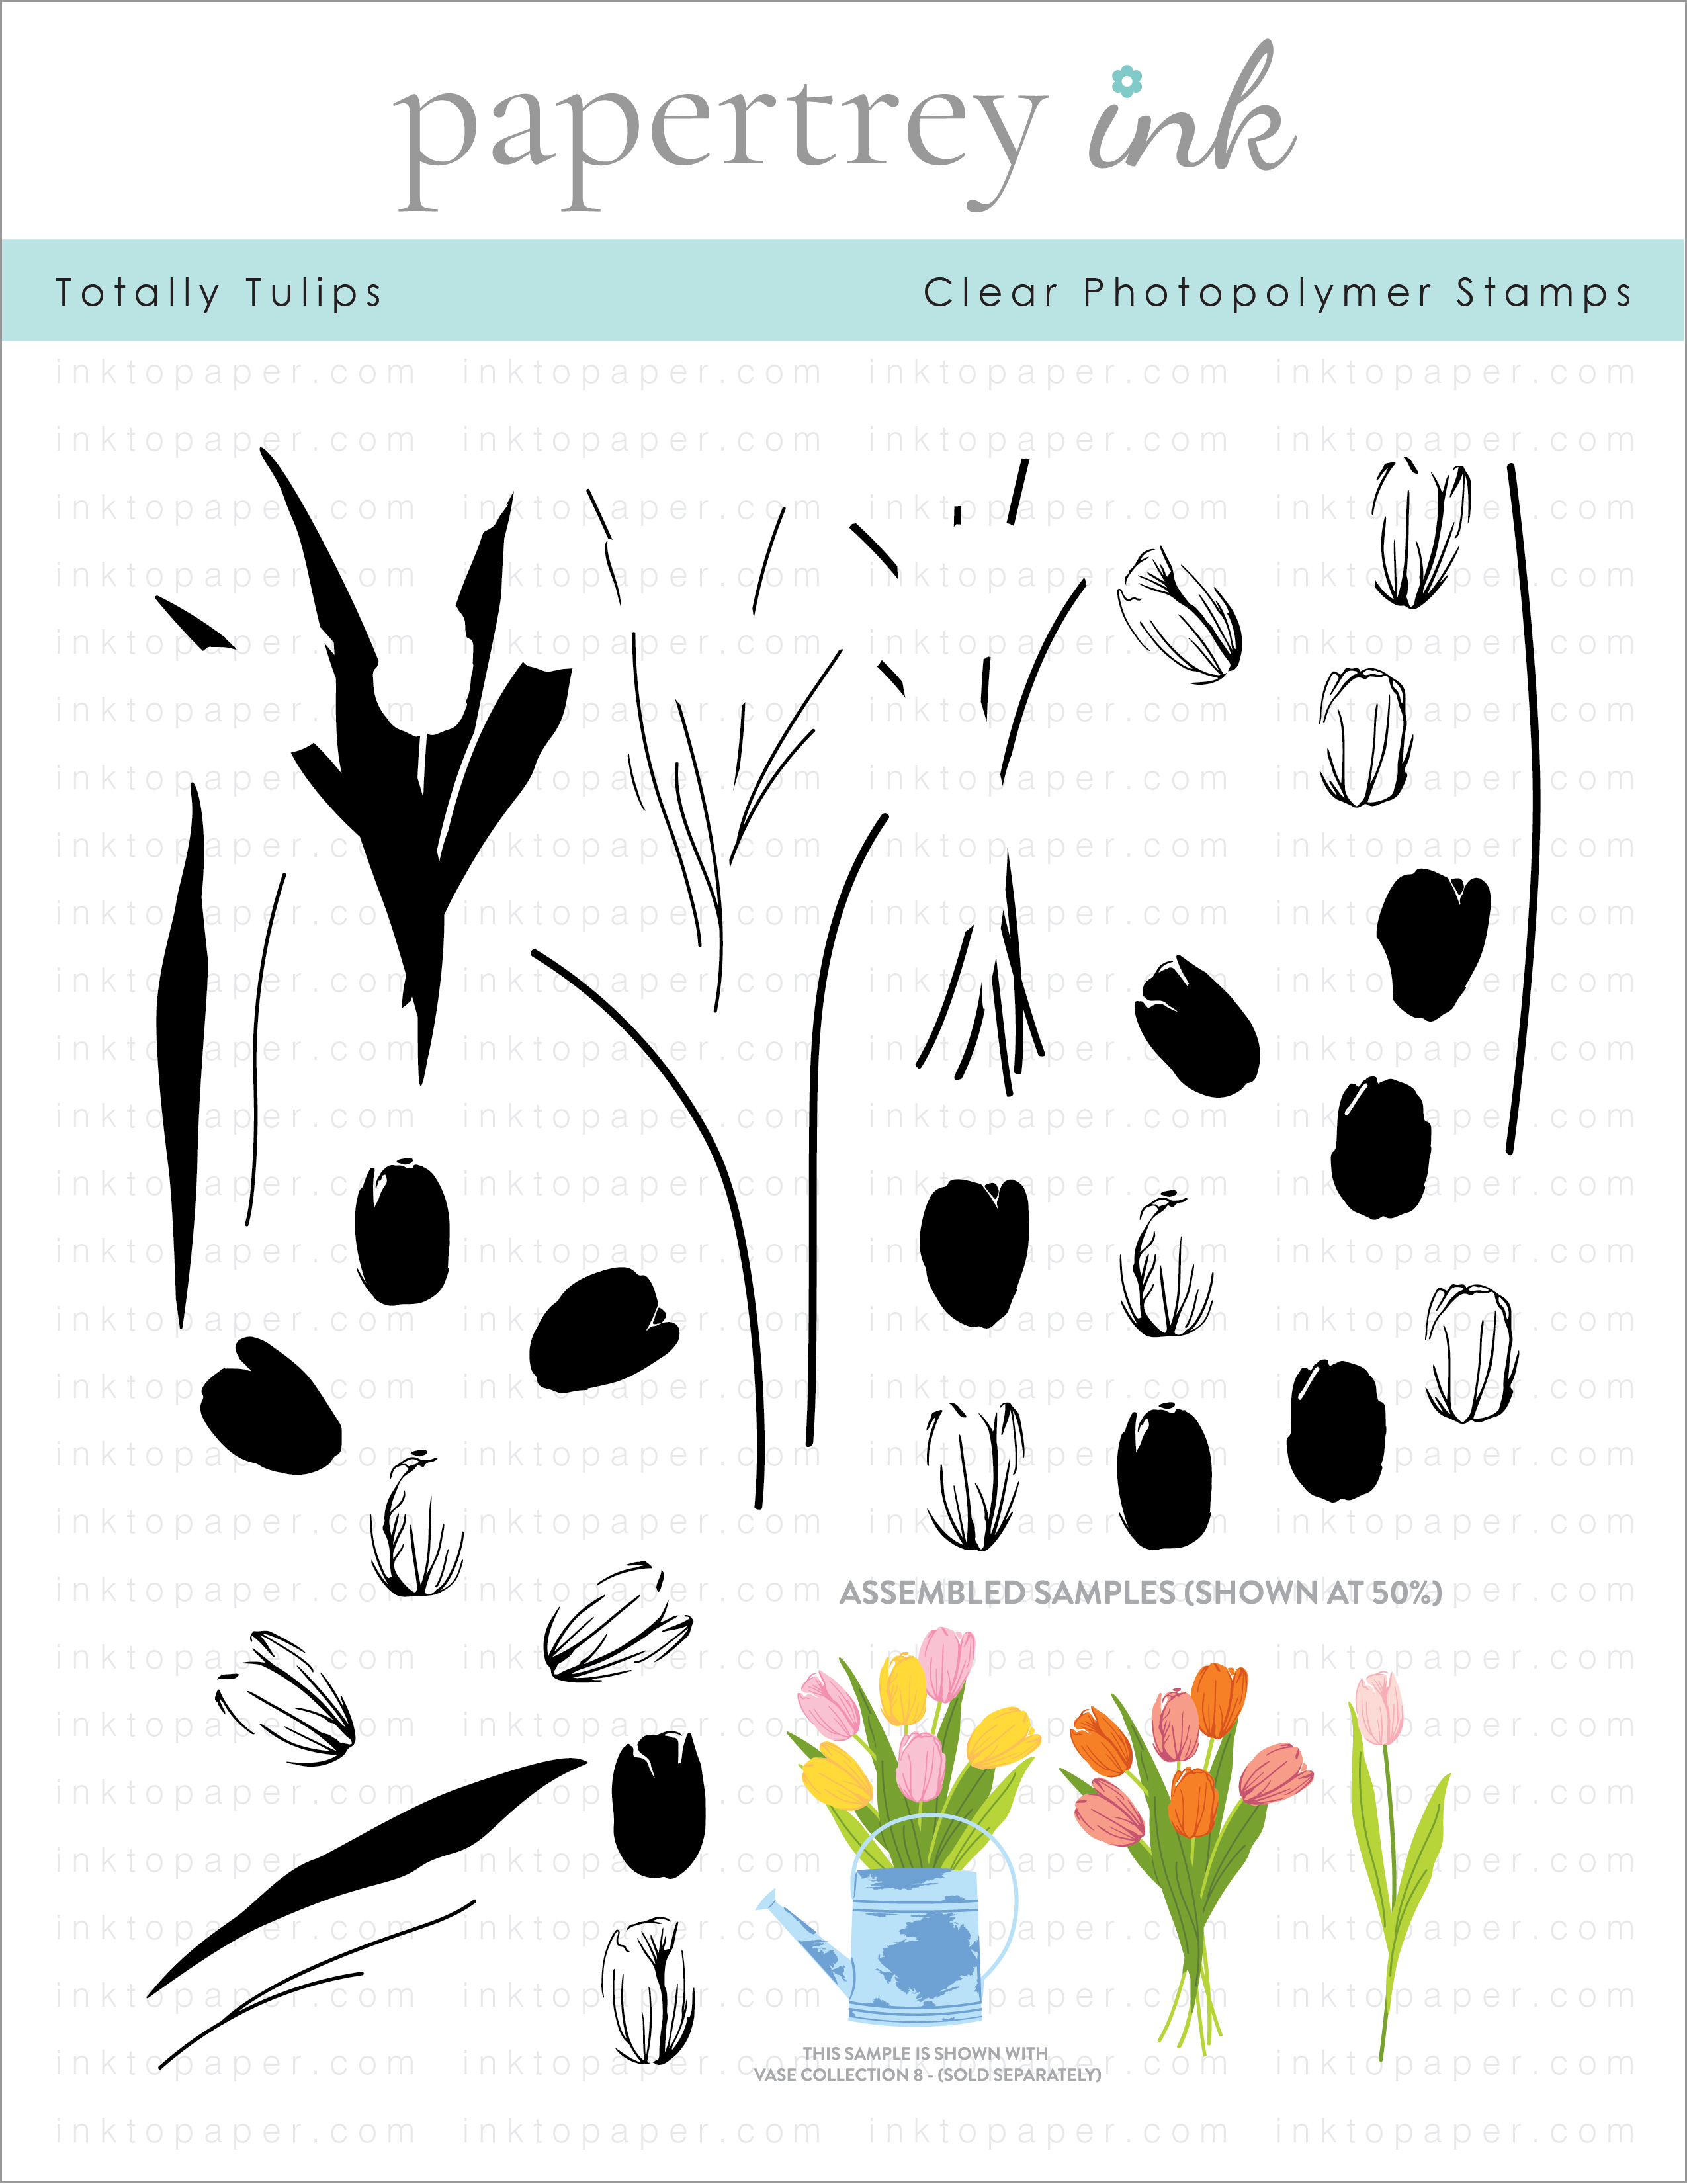 Totally Tulips Stamp Set: Papertrey Ink